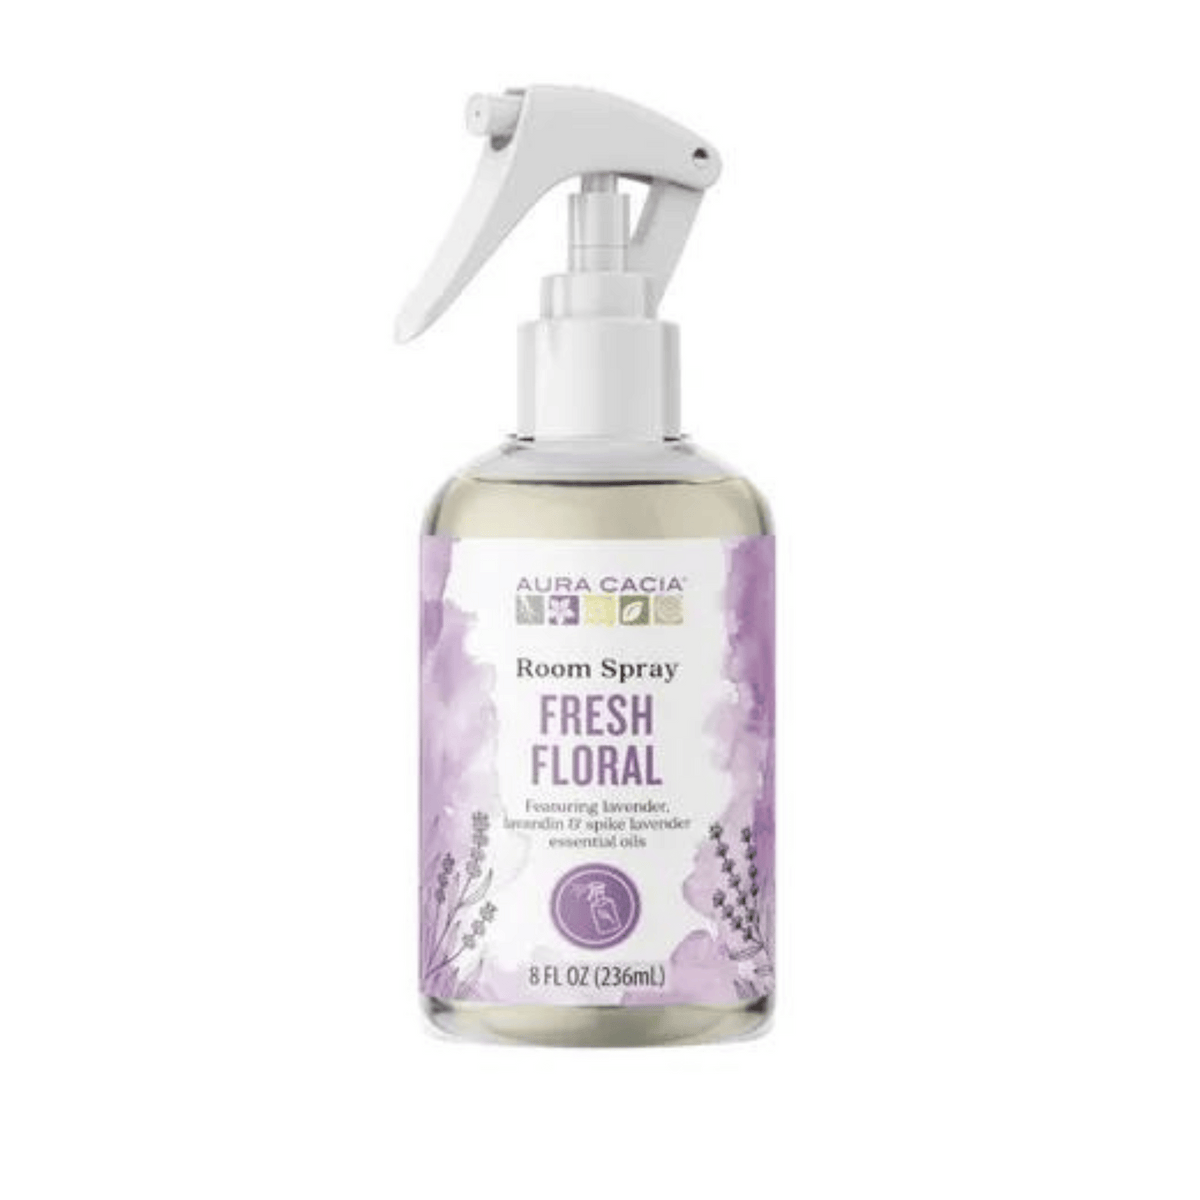 Primary Image of Room Spray - Fresh Floral